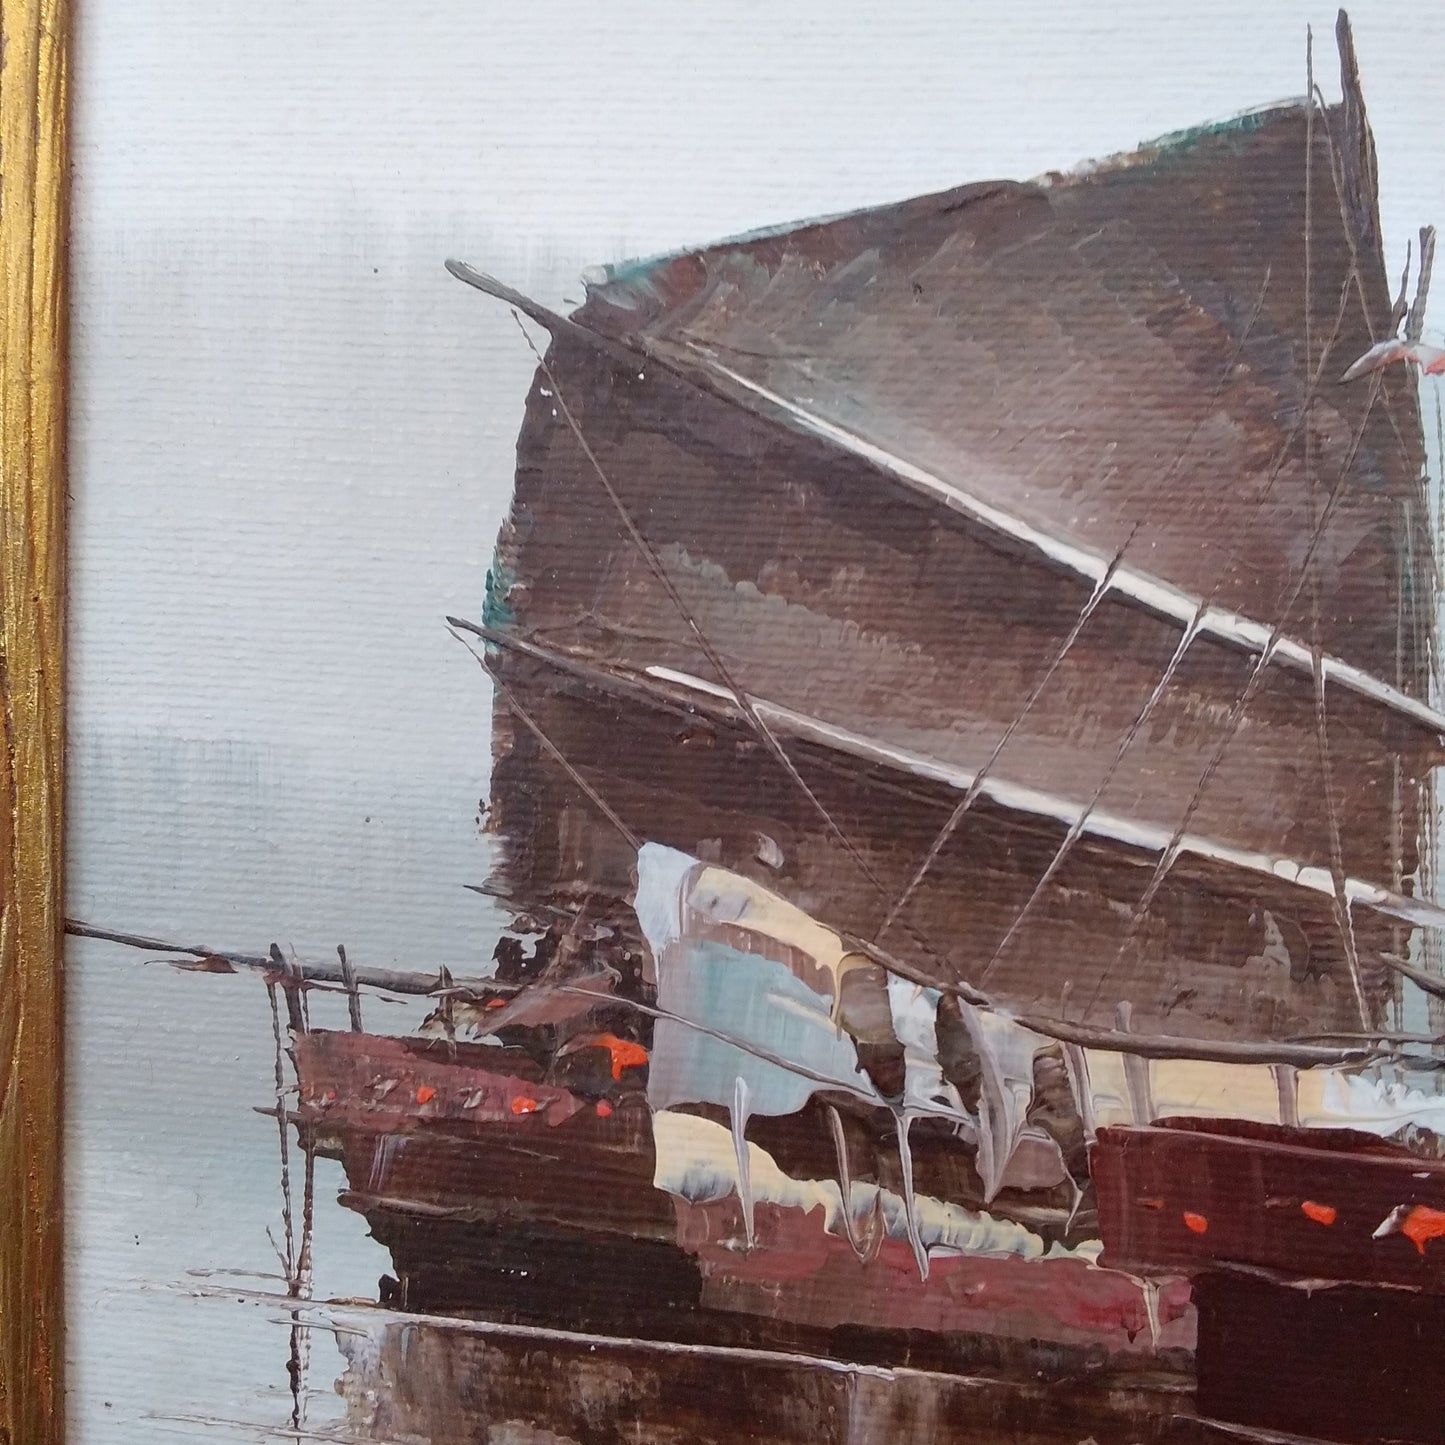 P. Wong - Certified Original Framed 12x16" Signed Oil Painting "Junk Boats at Sea"